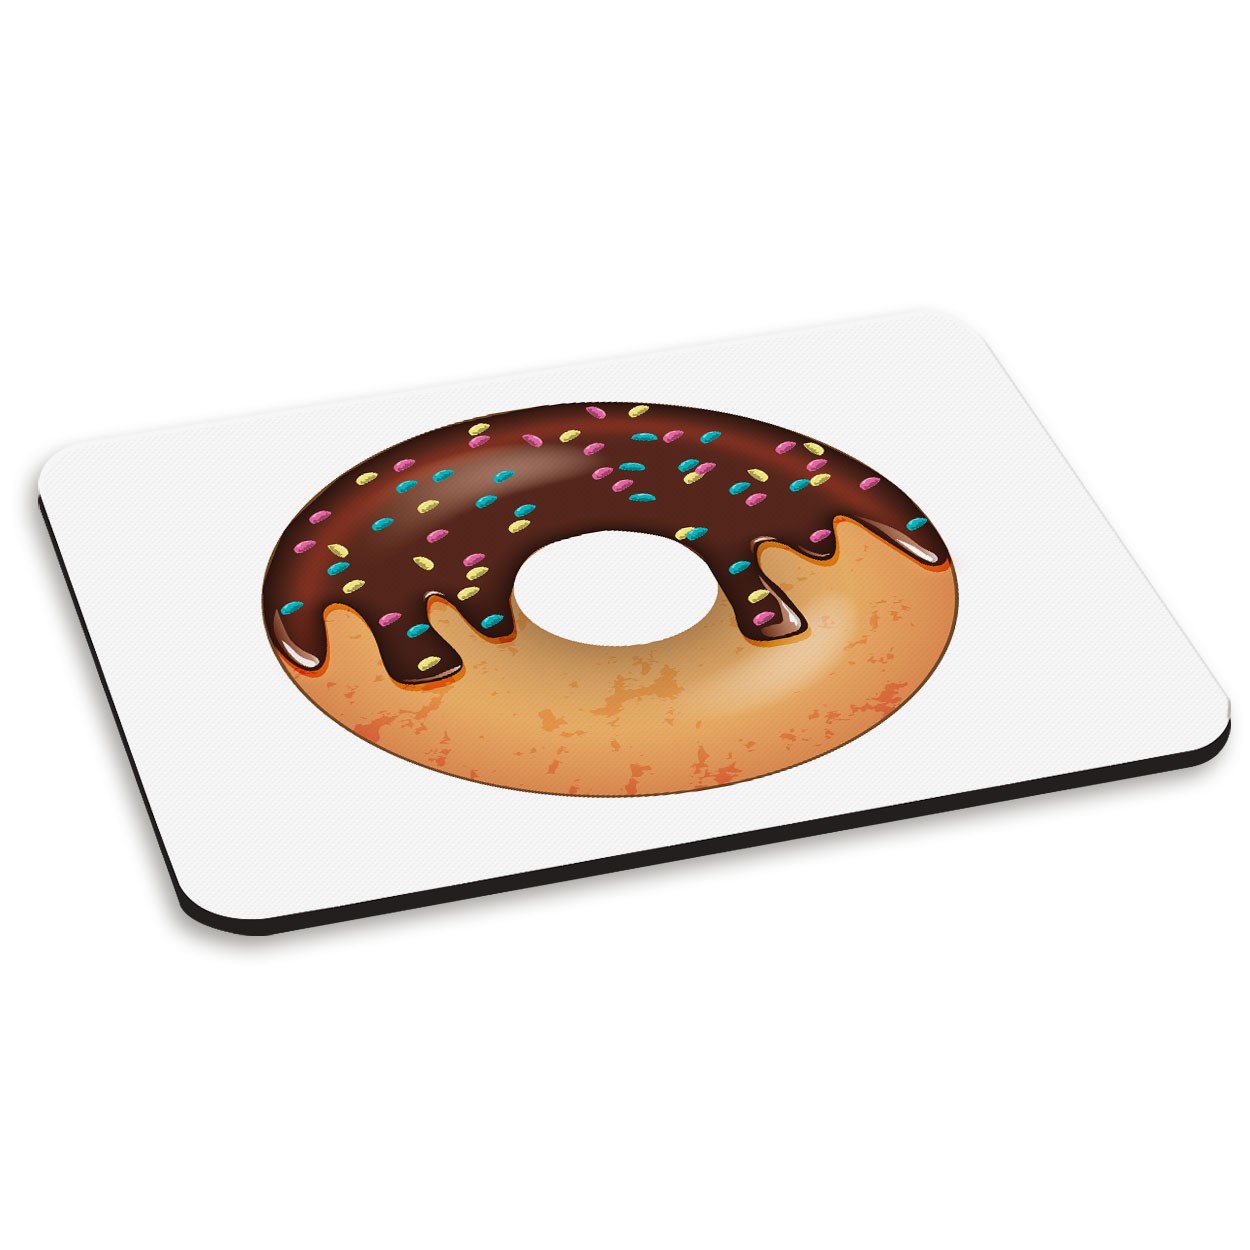 Chocolate Sprinkled Glazed Doughnut PC Computer Mouse Mat Pad